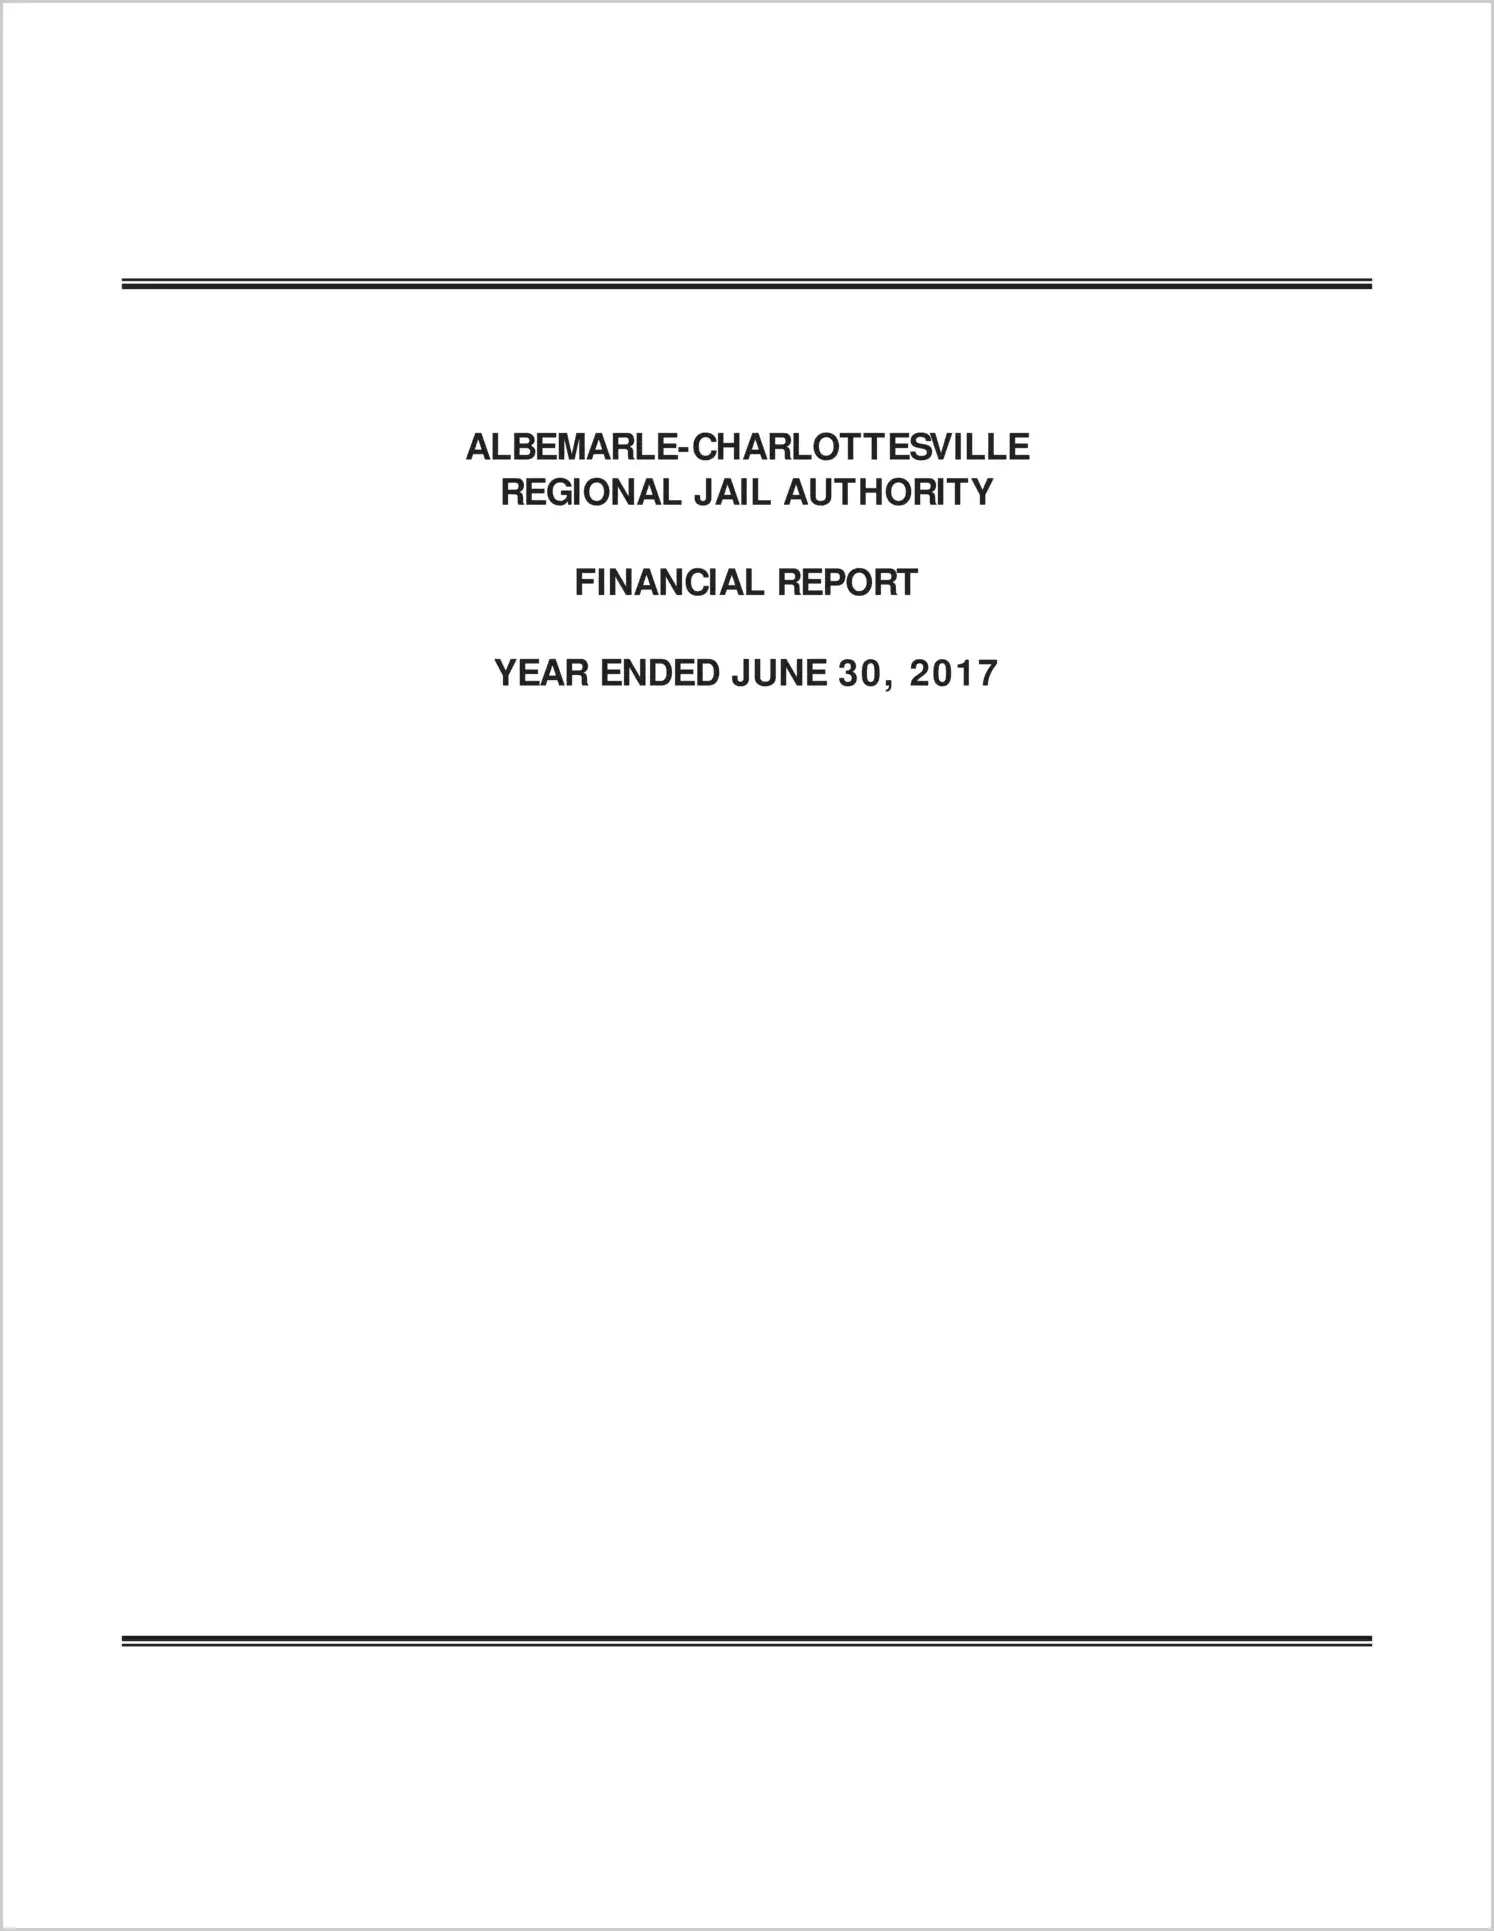 2017 ABC/Other Annual Financial Report  for Albemarle-Charlottesville Regional Jail Authority